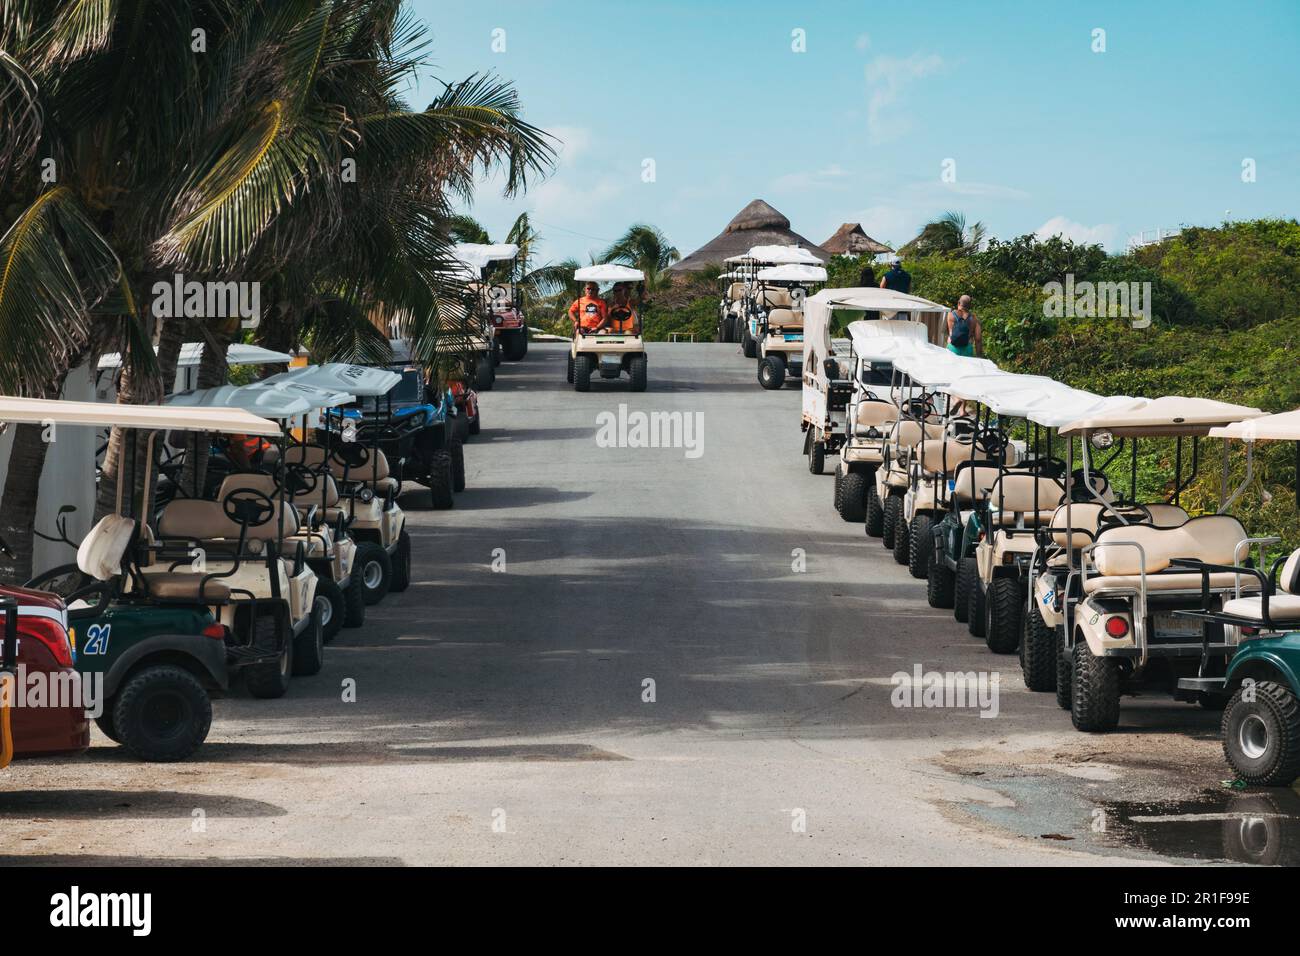 golf carts line the streets of Isla Mujeres, Yucatan, Mexico. The buggies are a popular way of getting around the island Stock Photo